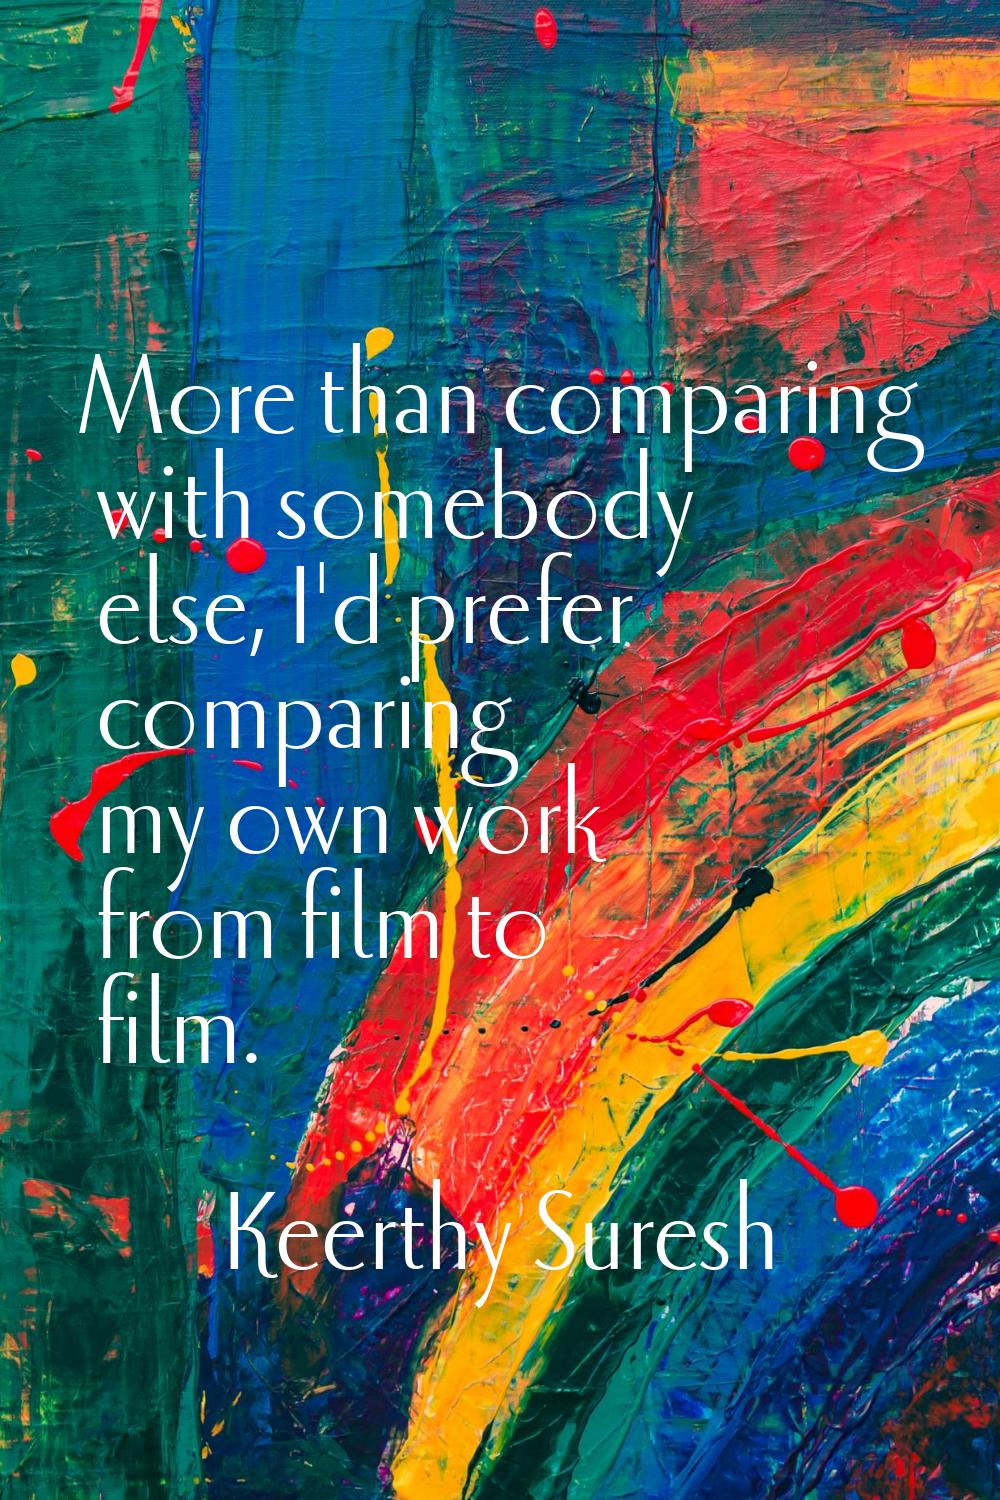 More than comparing with somebody else, I'd prefer comparing my own work from film to film.